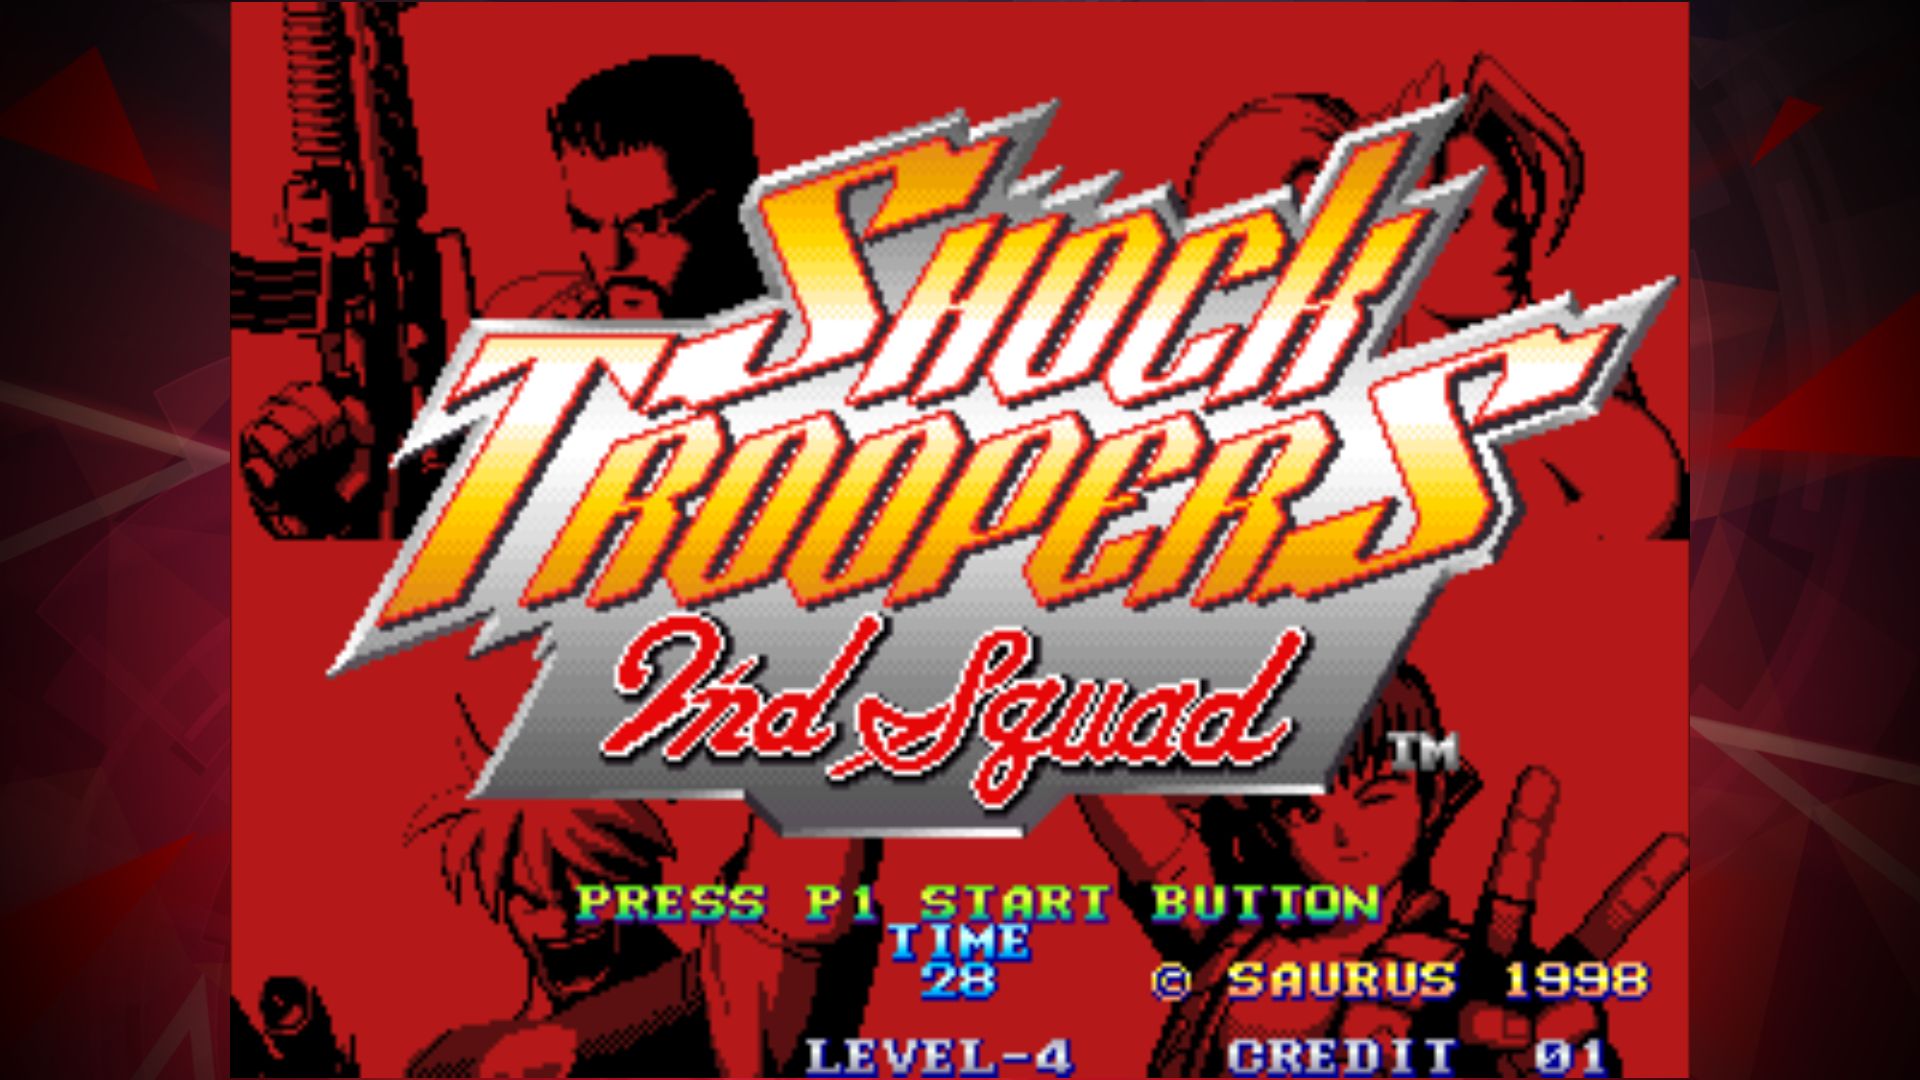 SHOCK TROOPERS 2nd Squad